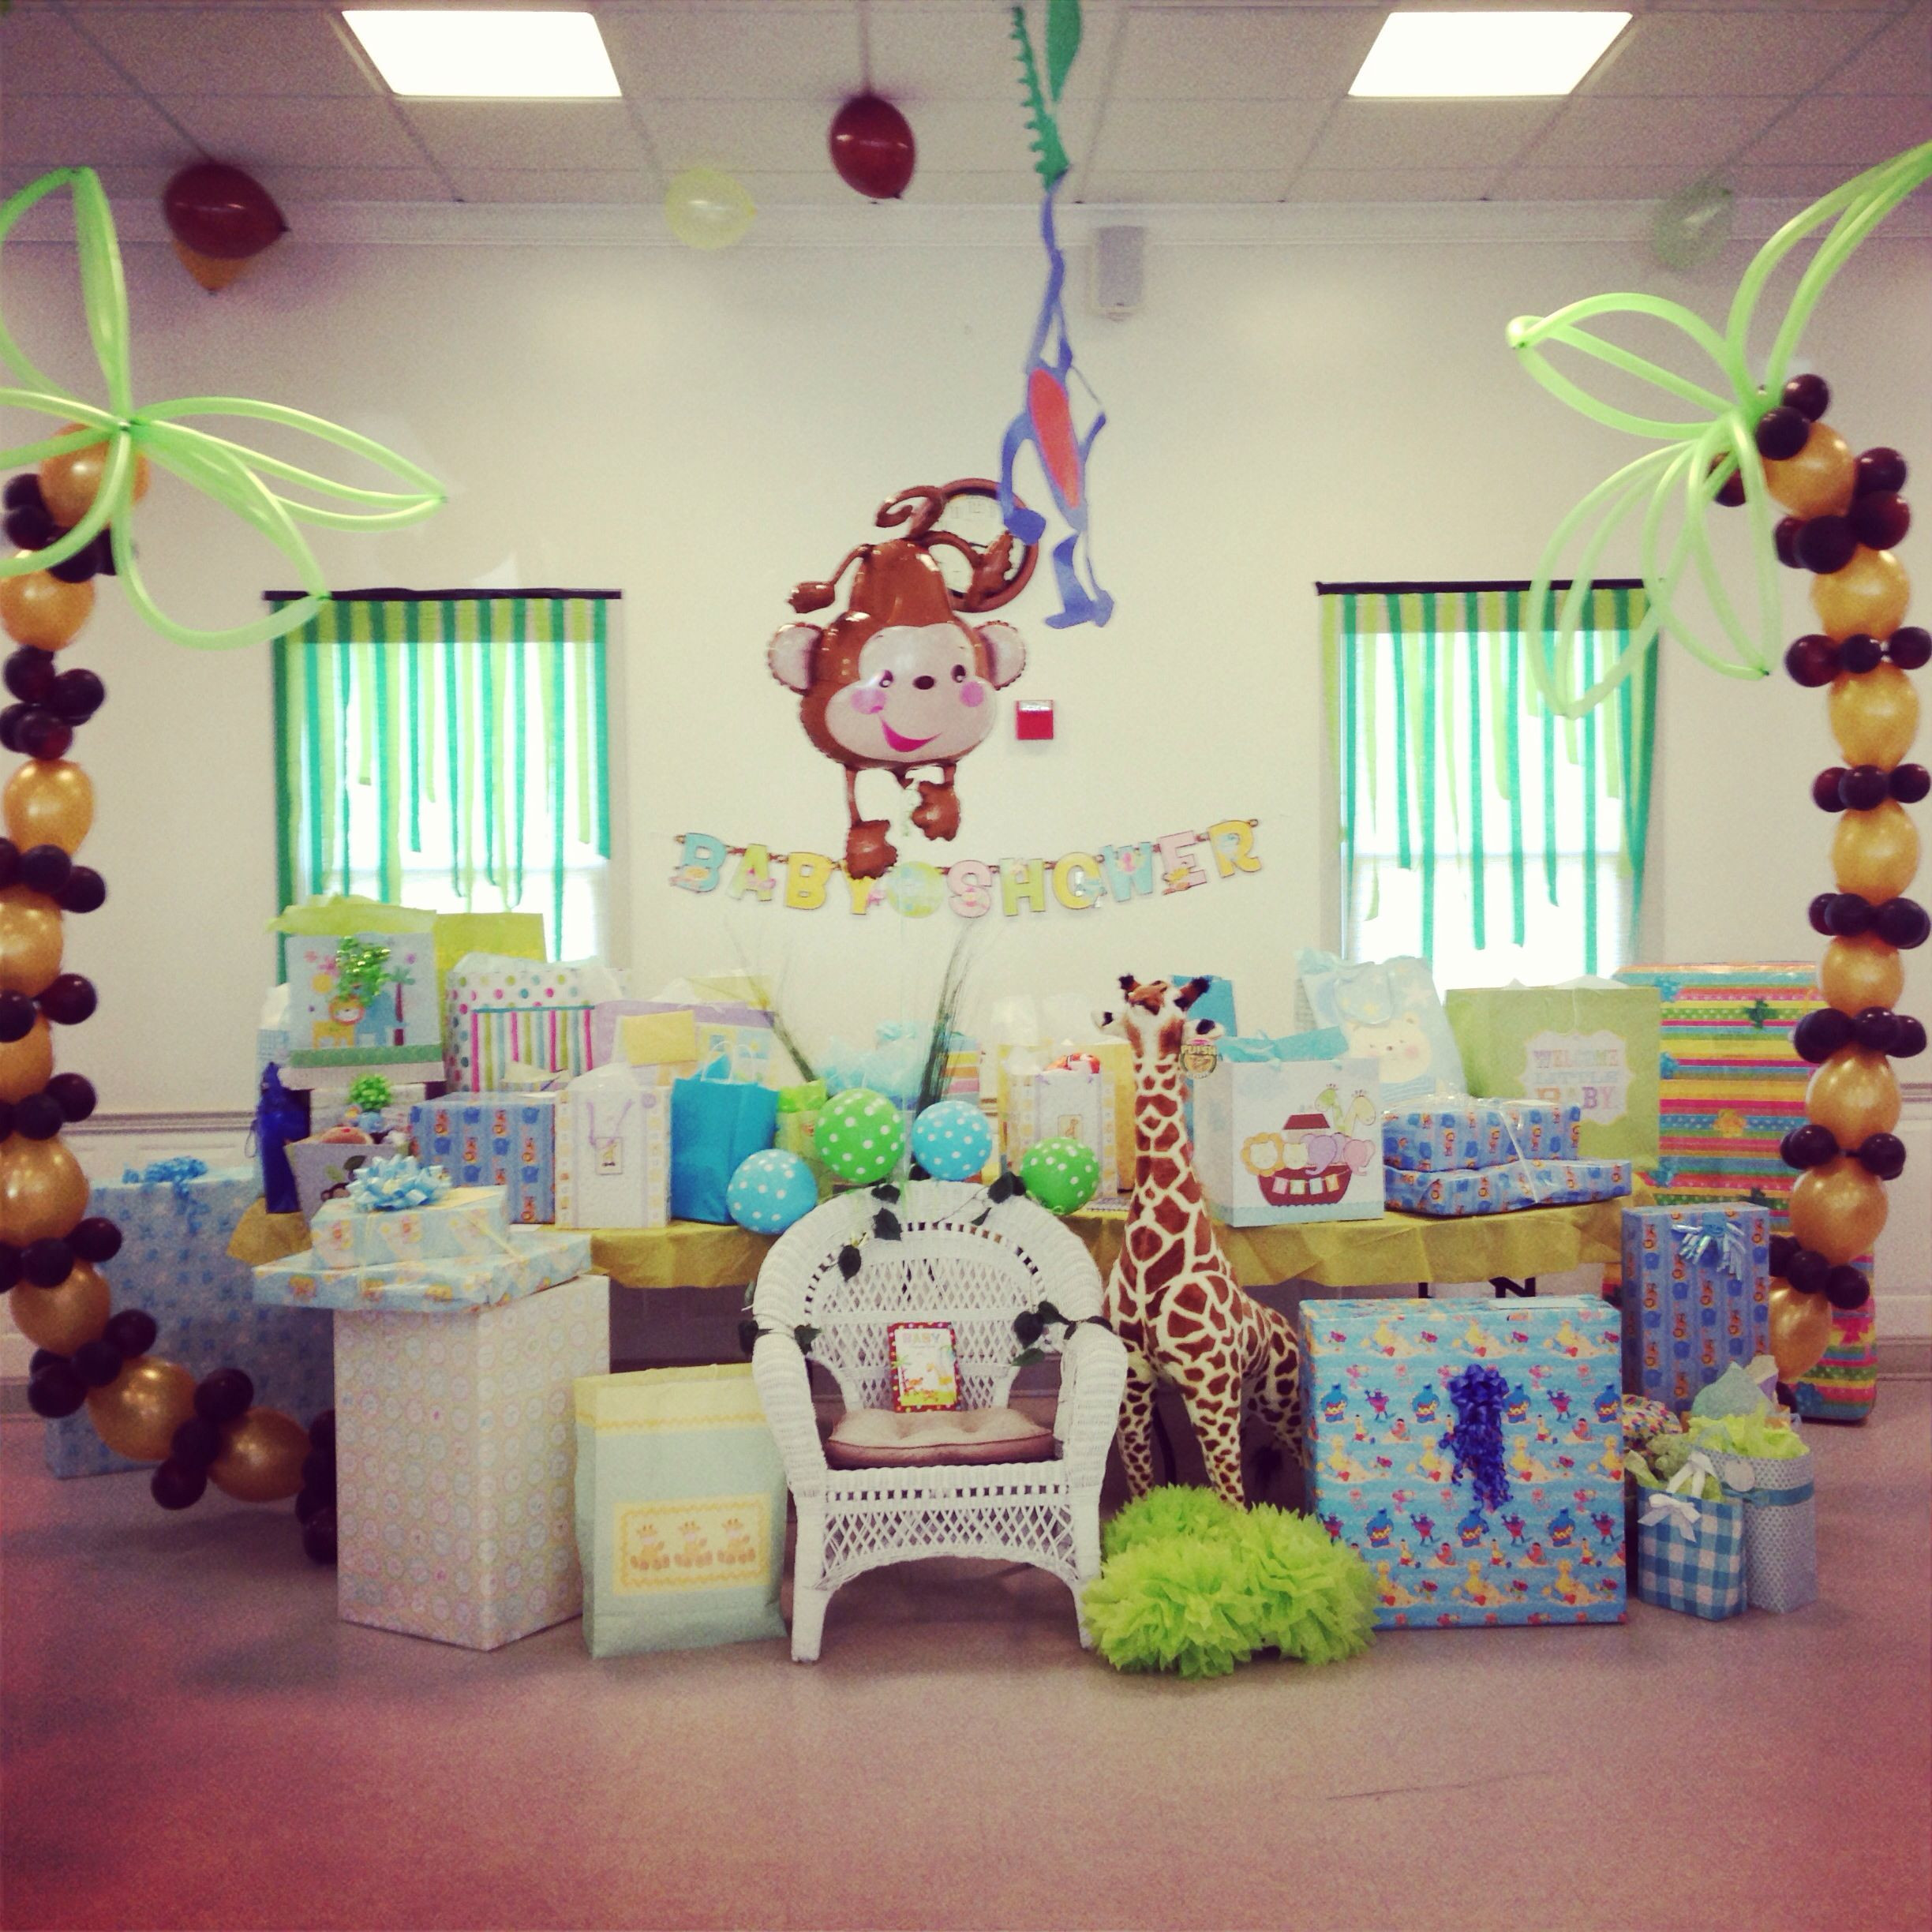 Gift Table Ideas For Baby Shower
 Gift table jungle themed baby shower Baby shower